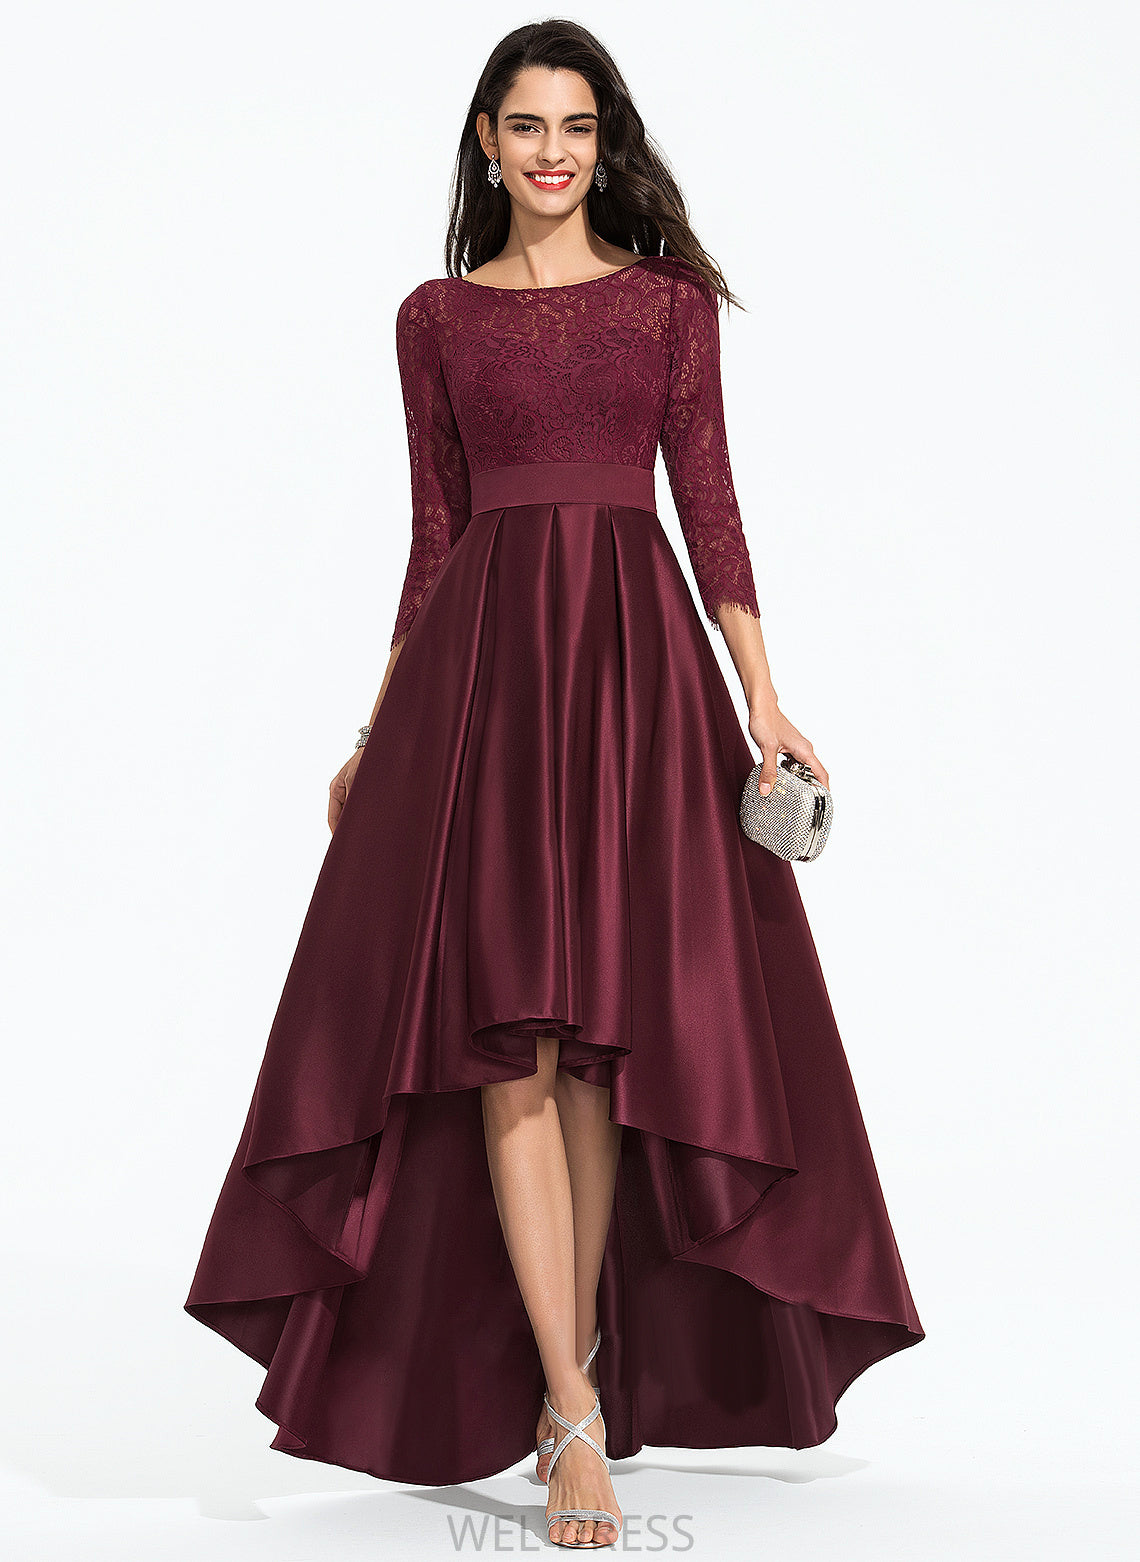 With Scoop Asymmetrical Ball-Gown/Princess Satin Neck Bow(s) Saniyah Prom Dresses